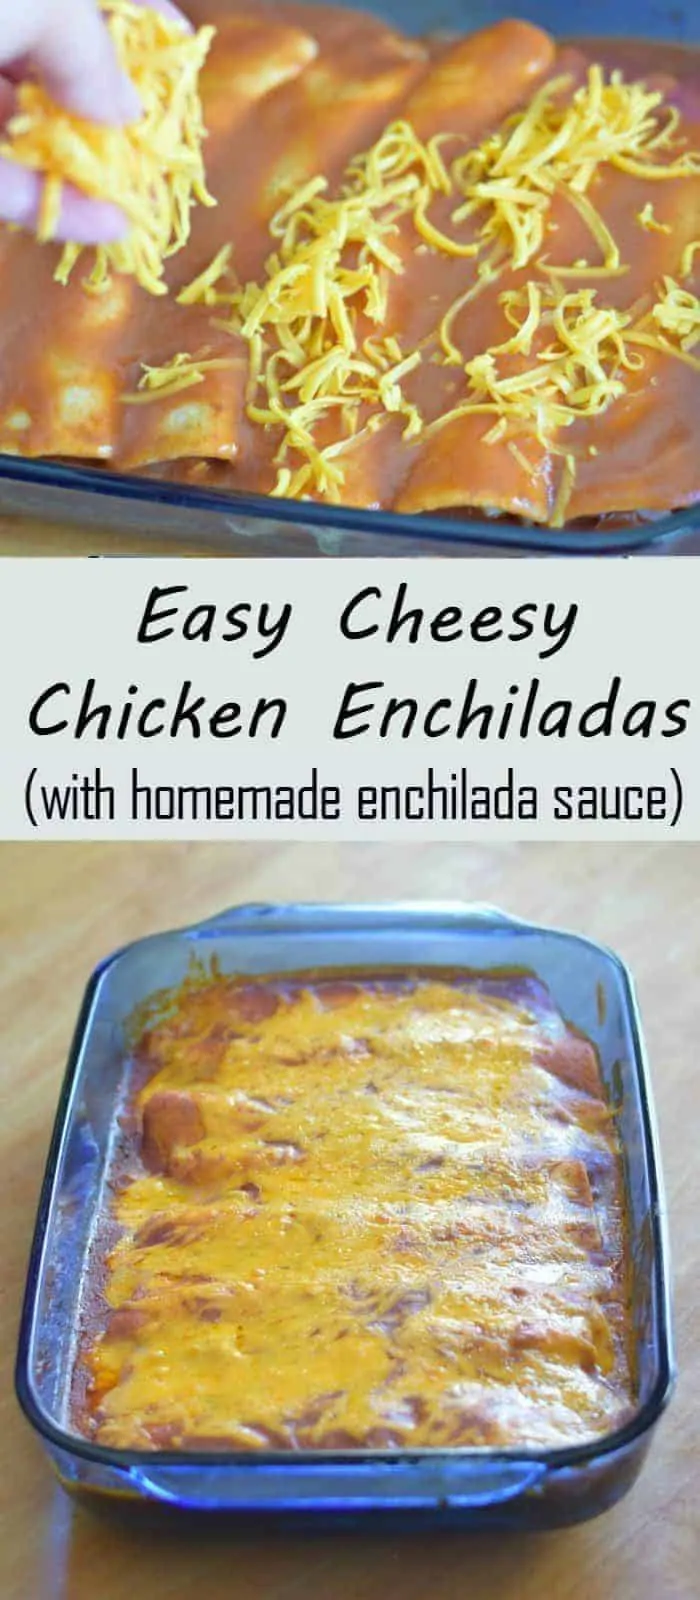 Easy cheesy chicken enchiladas recipe with homemade enchilada sauce. This kid friendly dinner is ready in about a half hour and uses flour tortillas to make it easier!